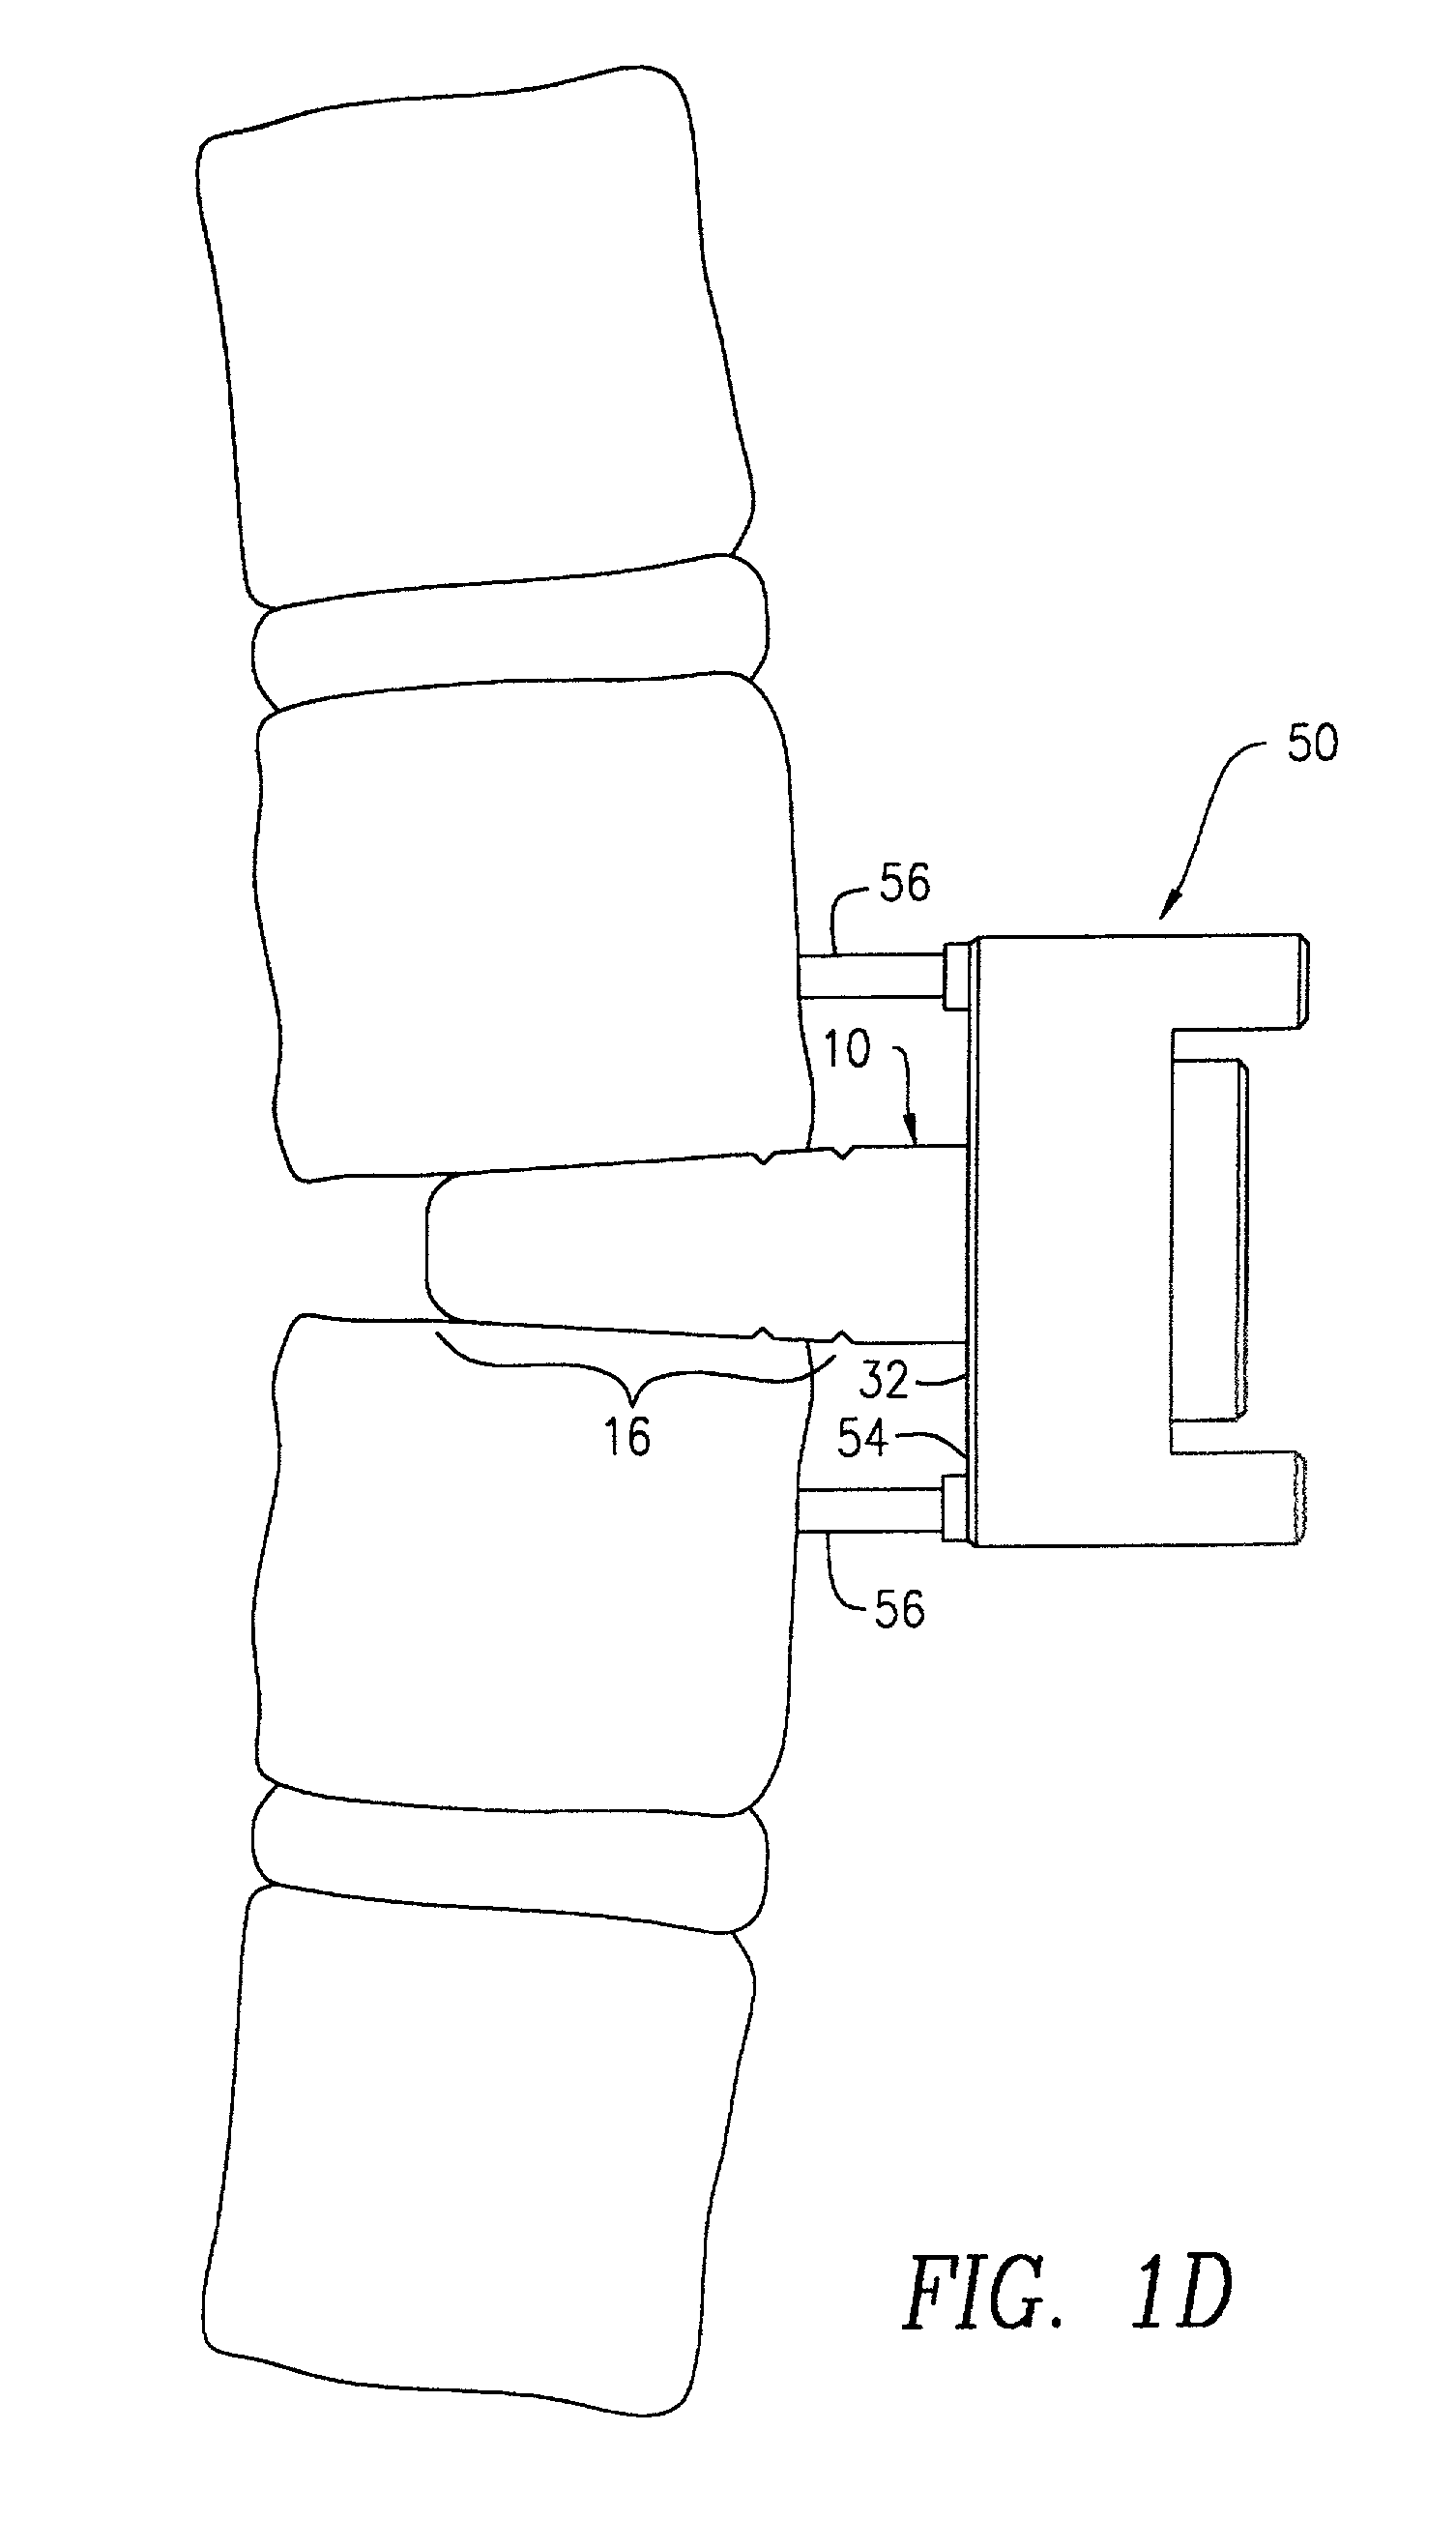 Instrument system for preparing a disc space between adjacent vertebral bodies to receive a repair device